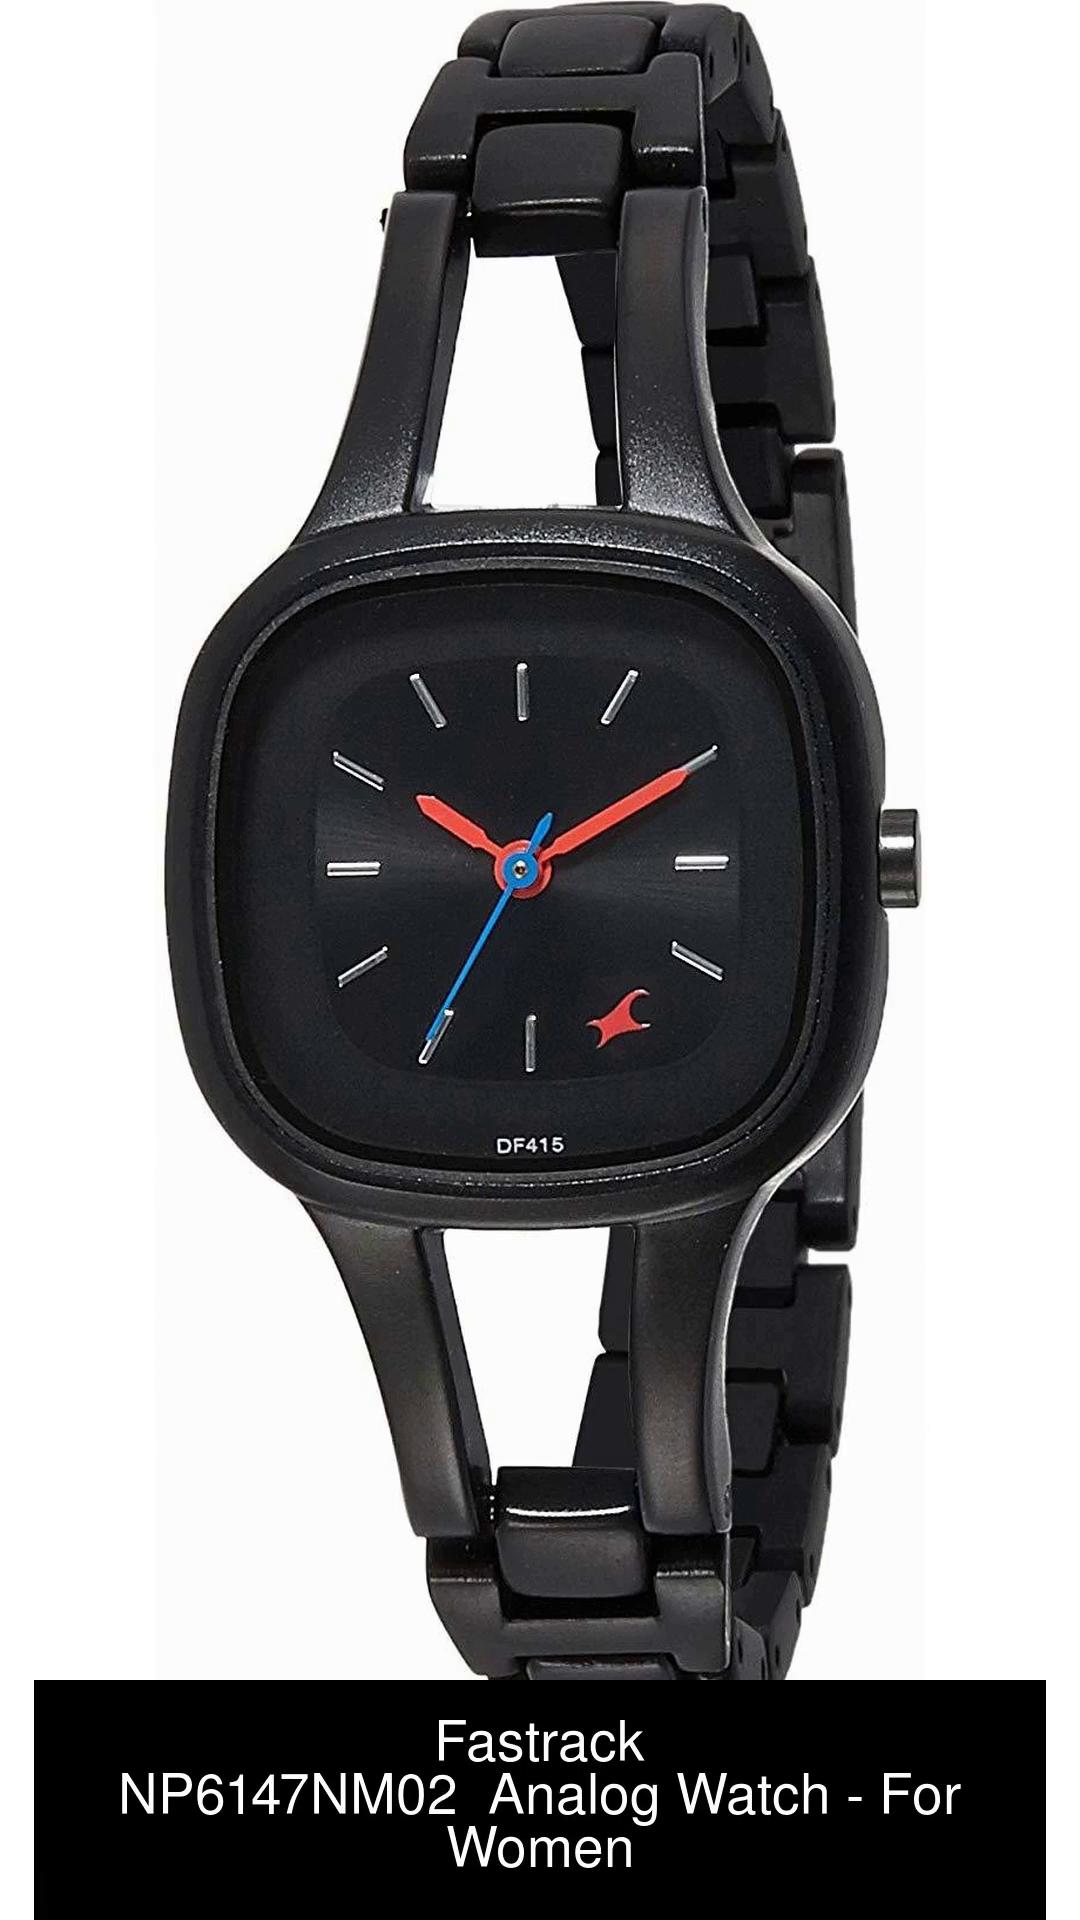 Fastrack NP6147NM02 Analog Watch - For Women - Buy Fastrack NP6147NM02  Analog Watch - For Women NP6147NM02 Online at Best Prices in India |  Flipkart.com